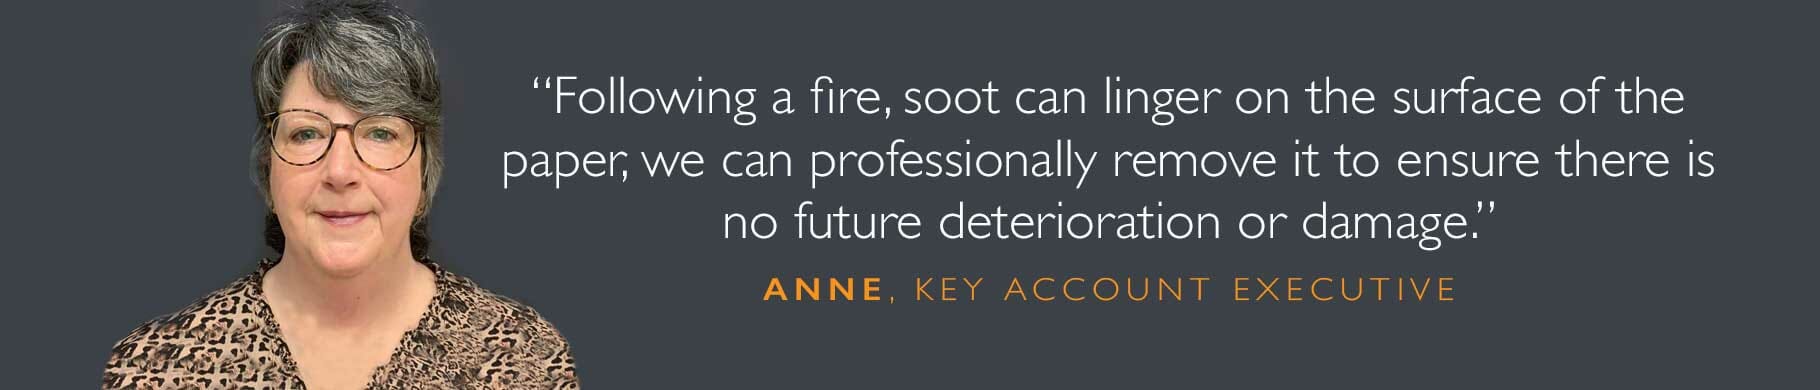 Anne quote about soot damaged paper